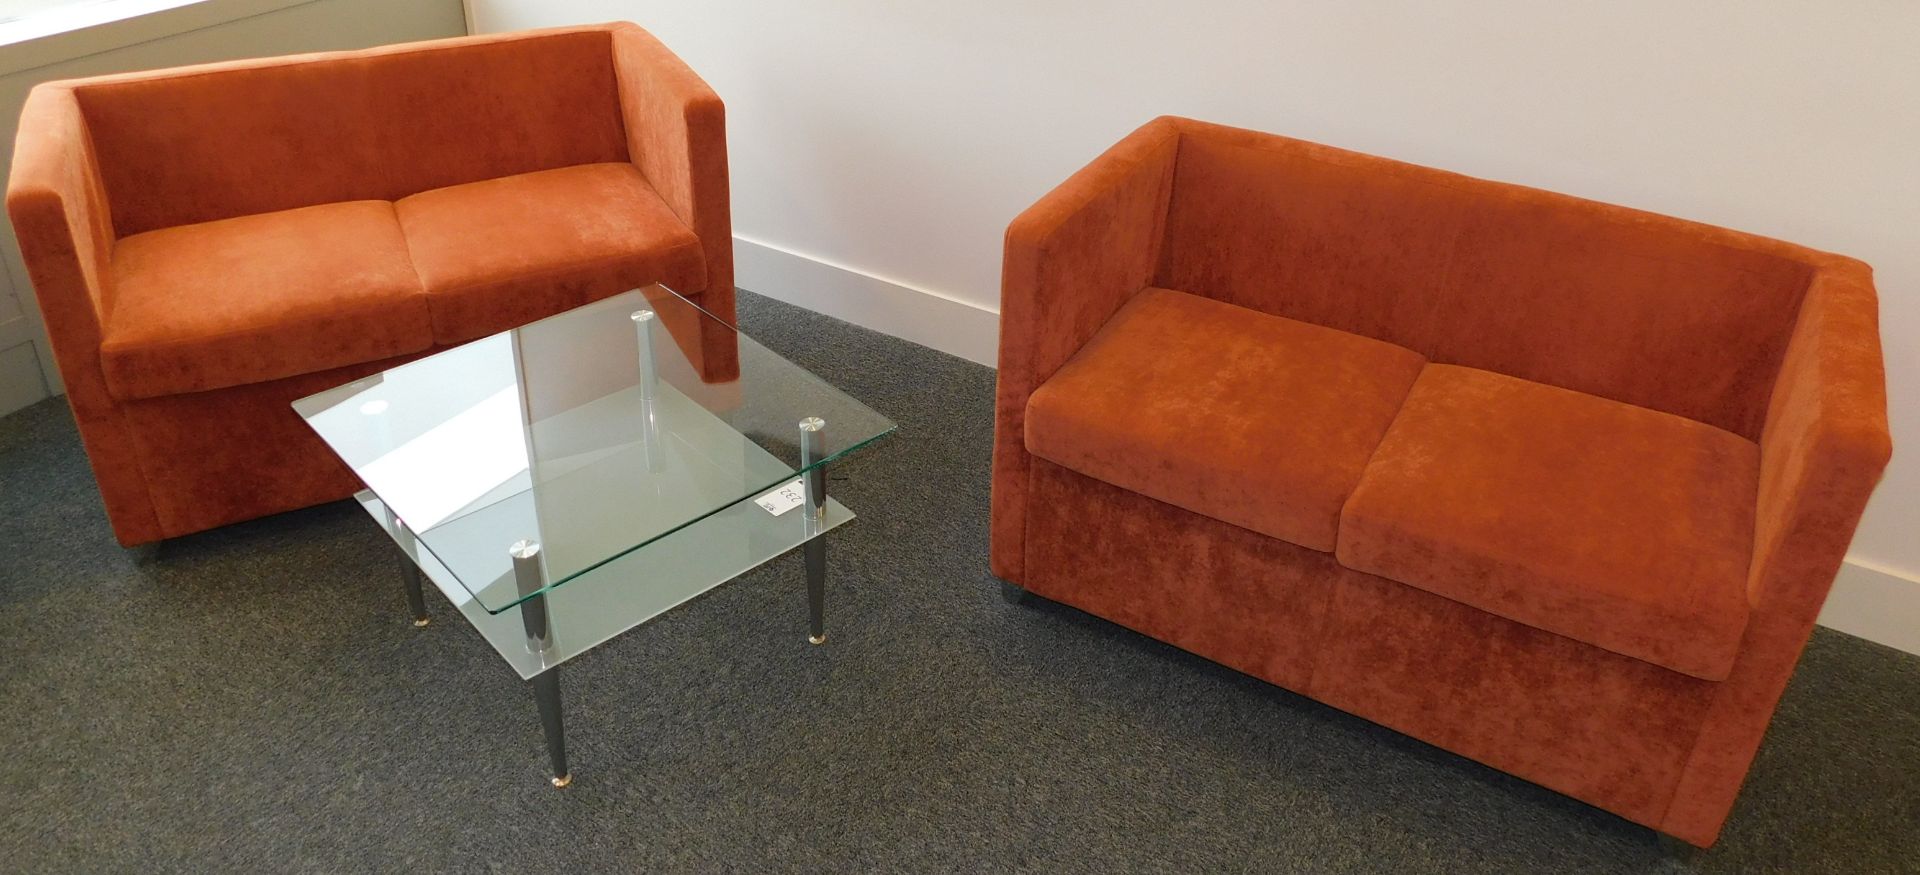 2 Jack 2-Seat Sofas with Glass Coffee Table (Located Stockport - See General Notes for More - Image 2 of 2